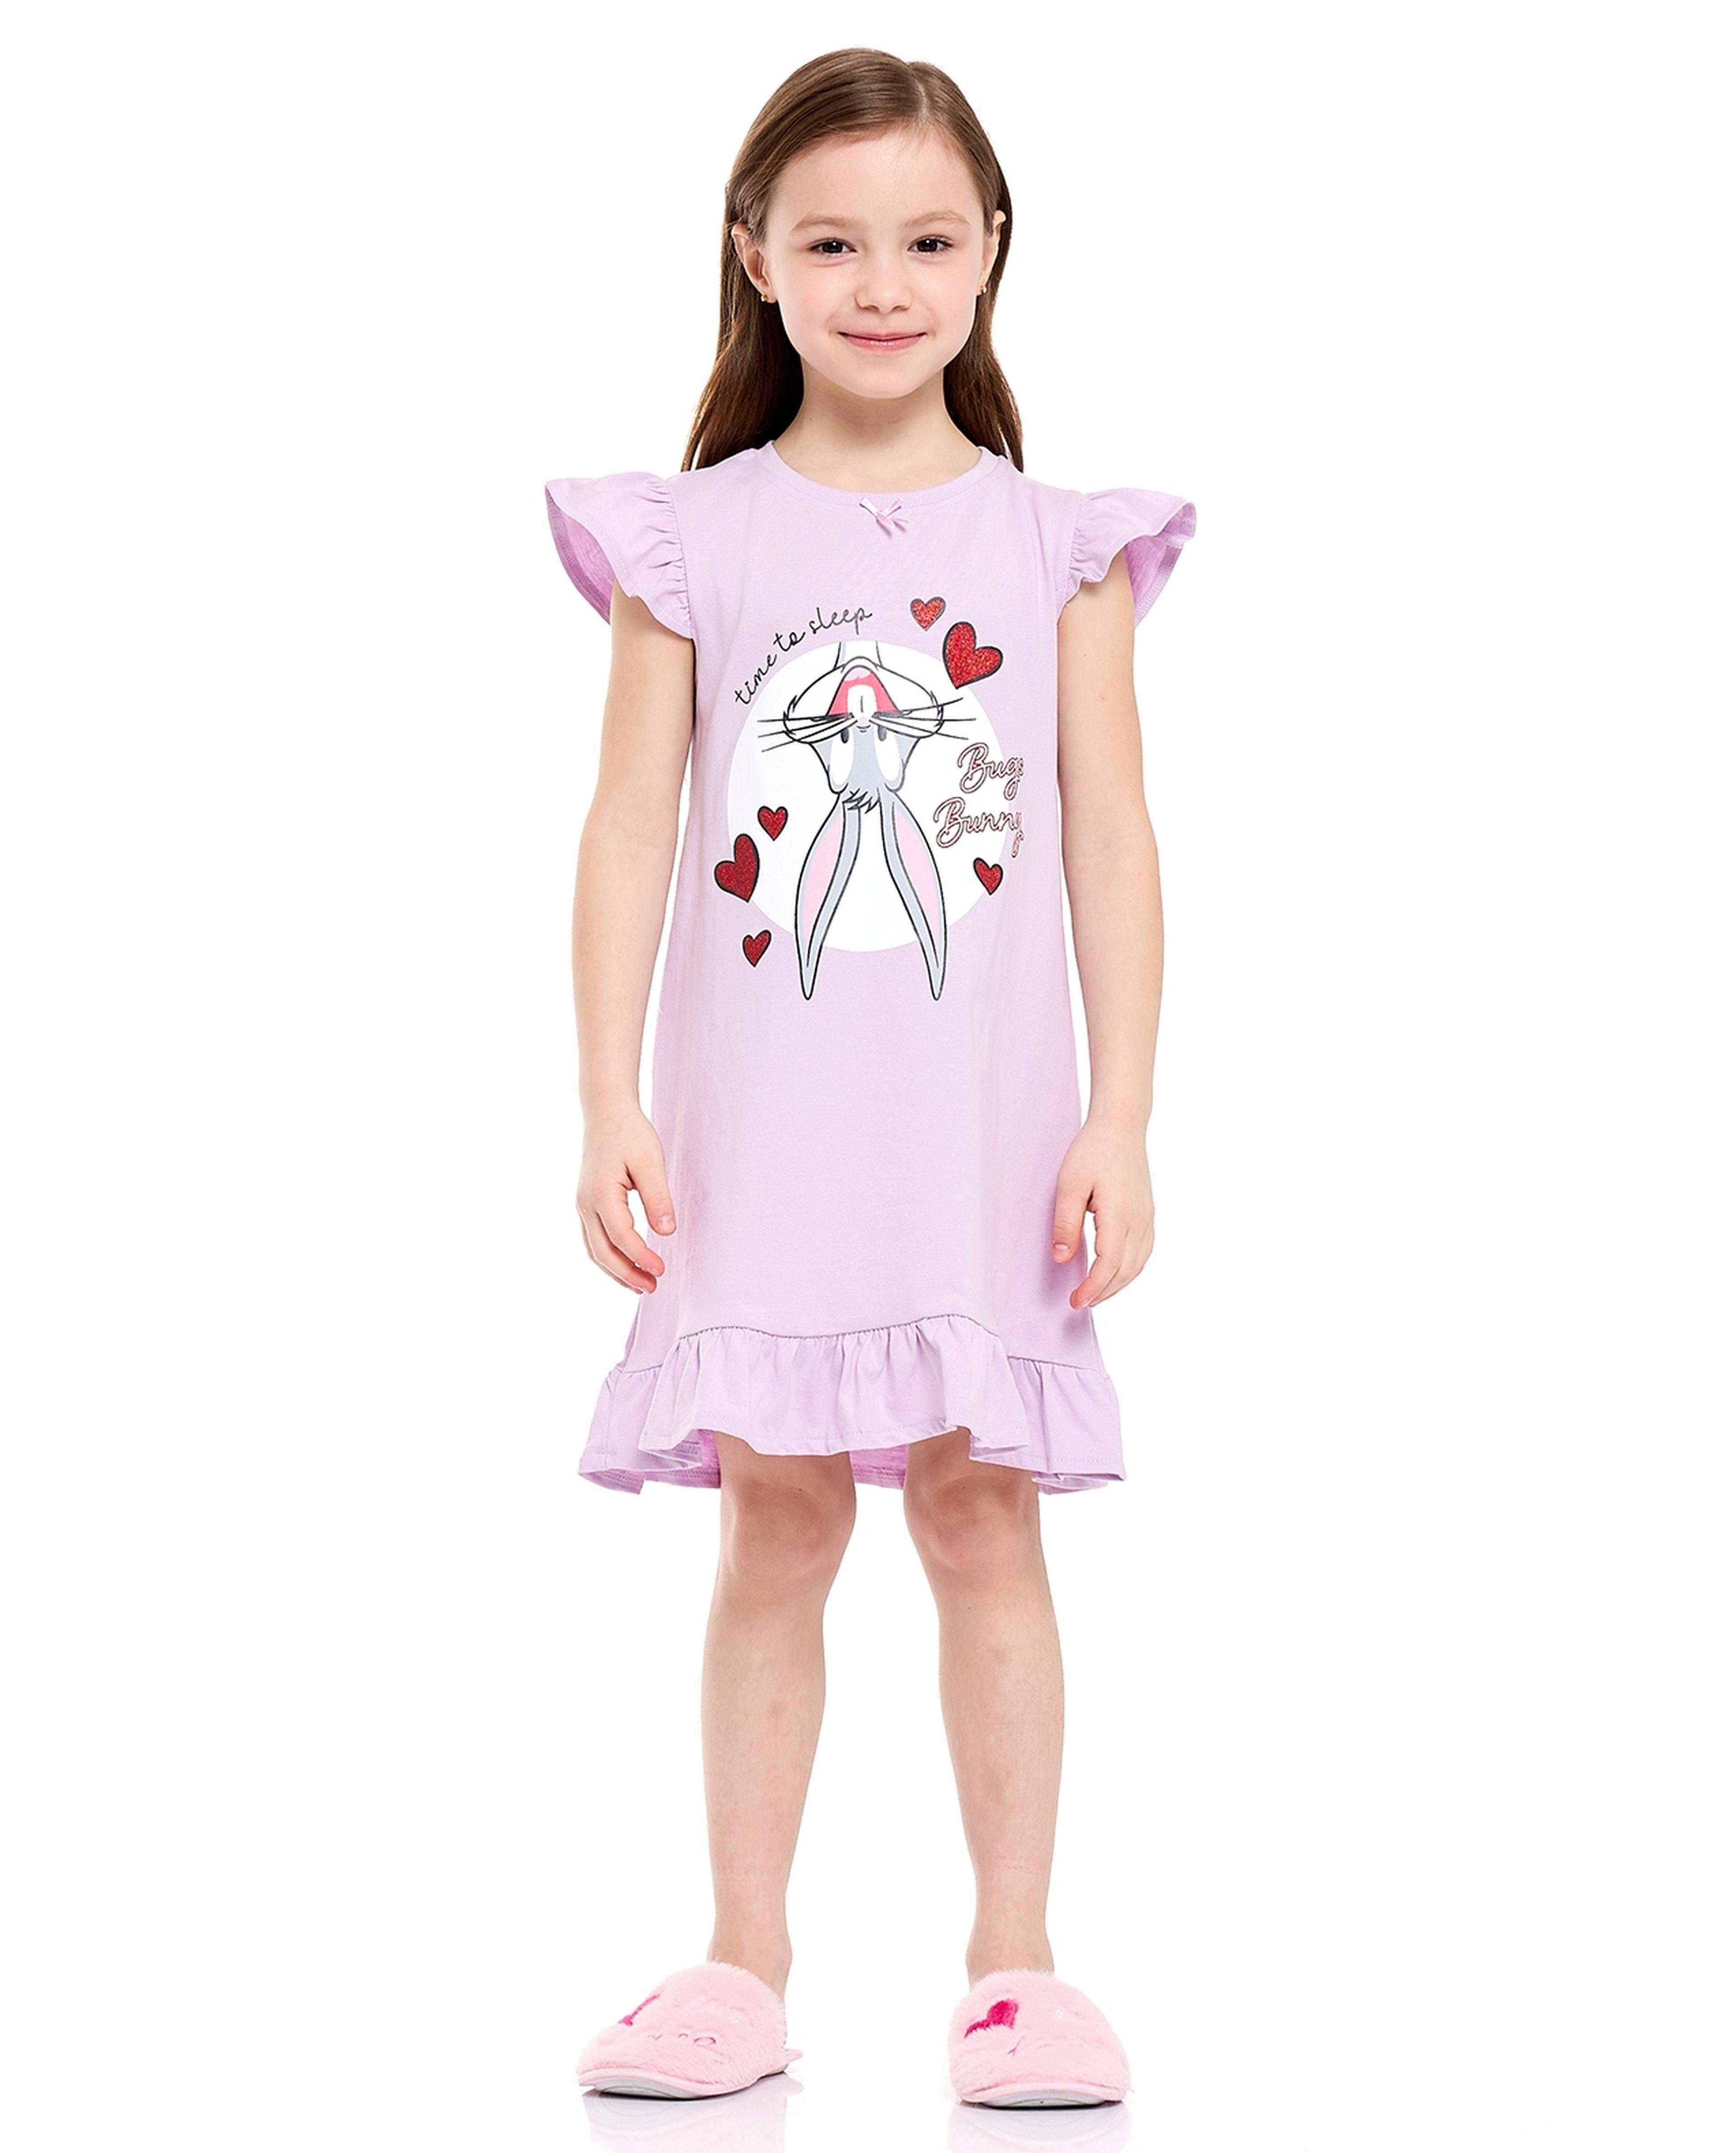 Pack of 2 Bugs Bunny Printed Nightdresses